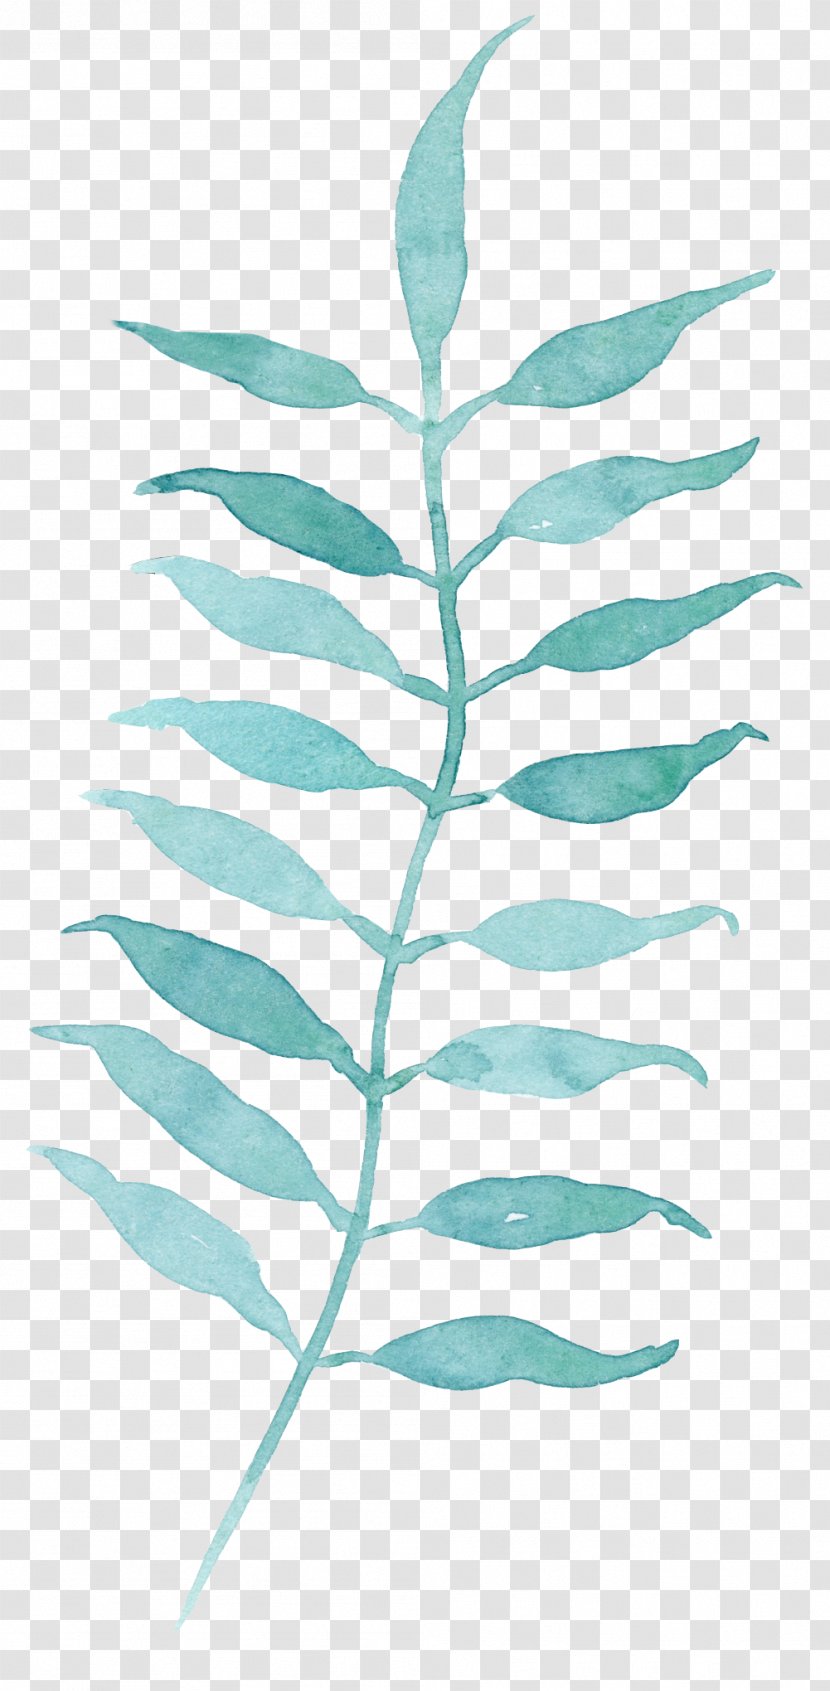 Leaf Poster Painting - Turquoise - Hand-painted Mint Green Leaves Transparent PNG